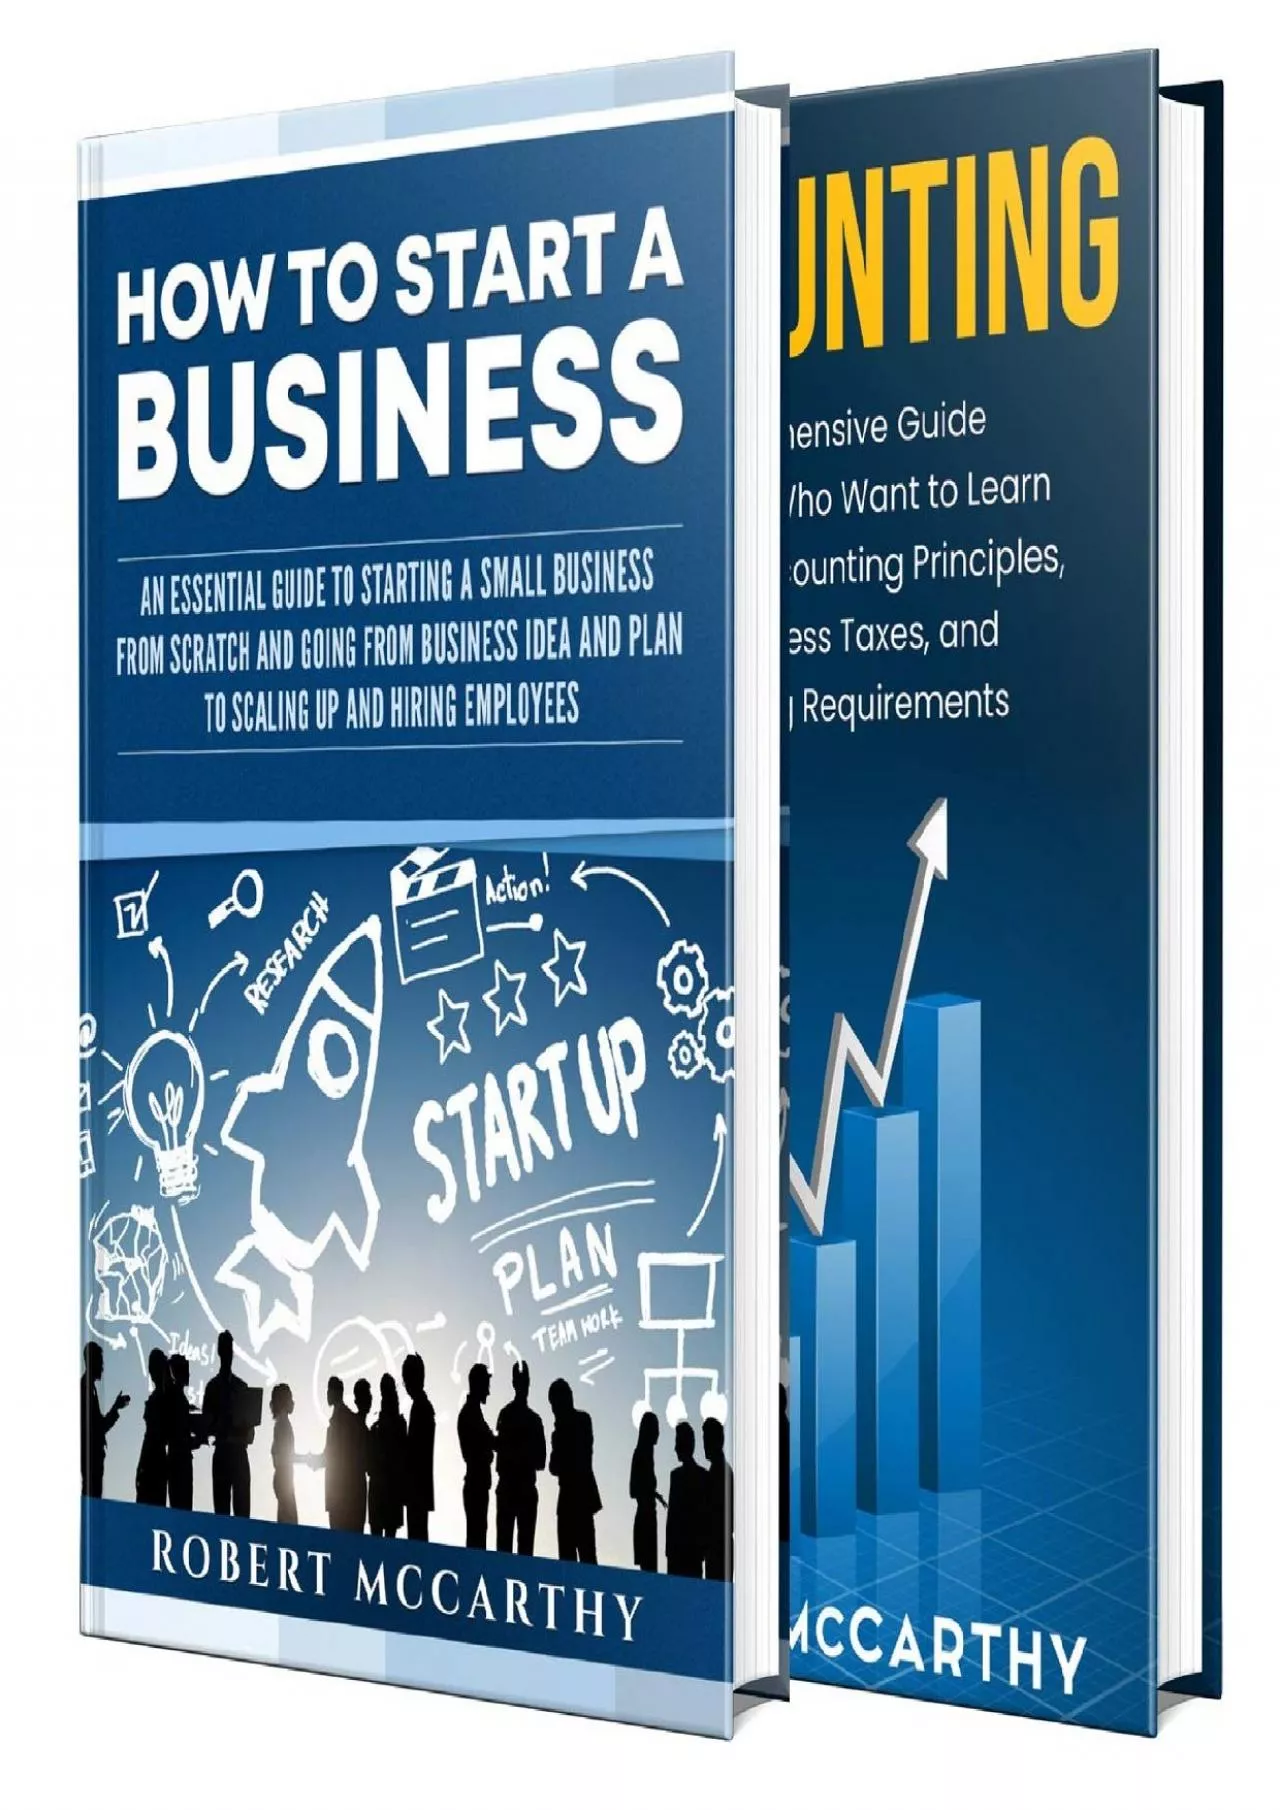 (EBOOK)-How to Start a Business and Accounting: The Steps to Starting a Small Business,